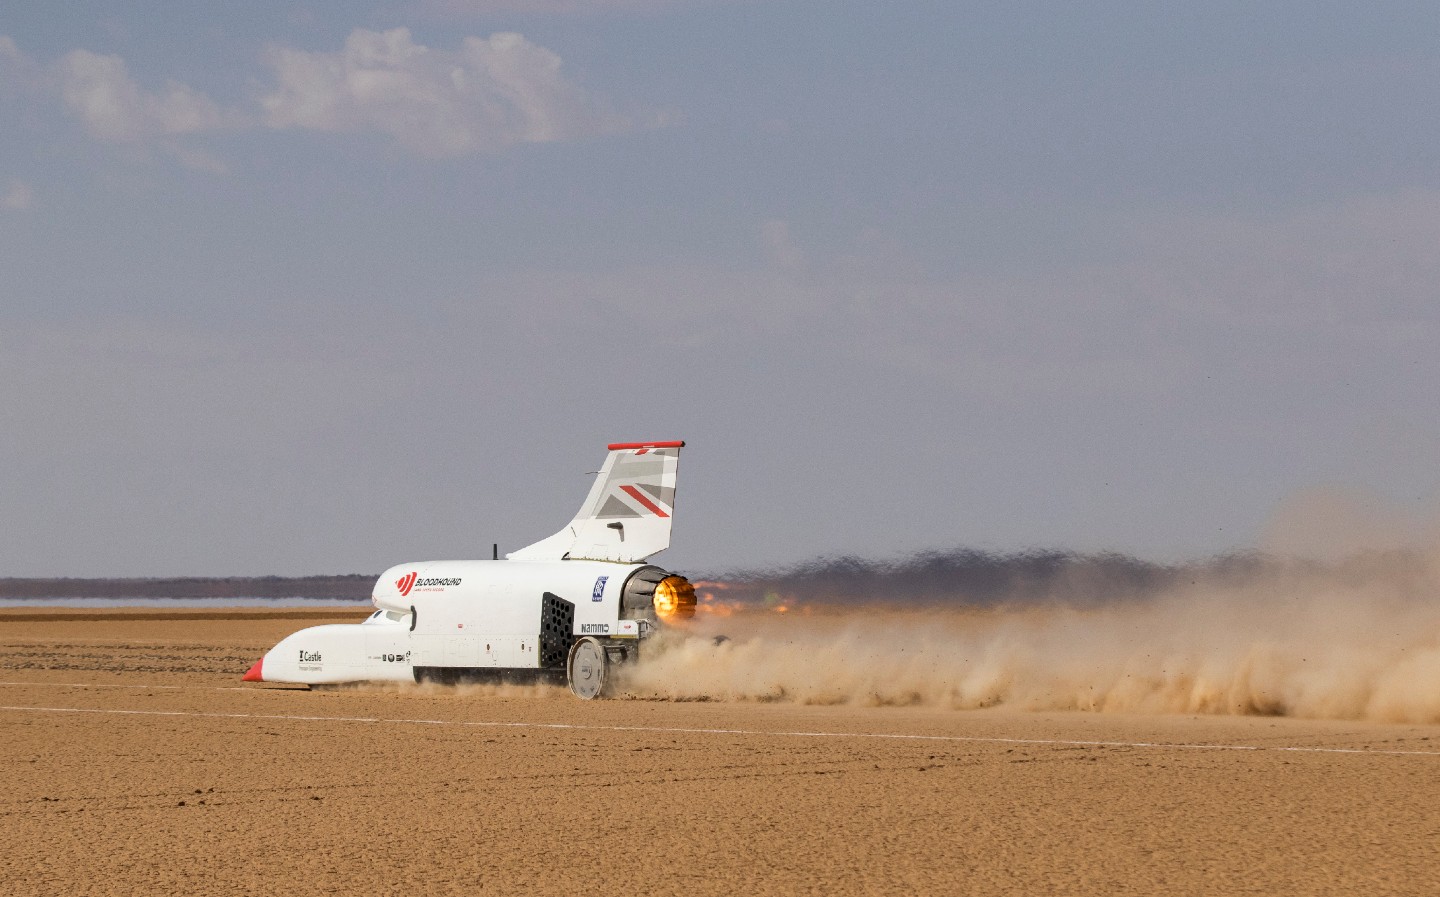 Bloodhound LSR land speed record project up for sale